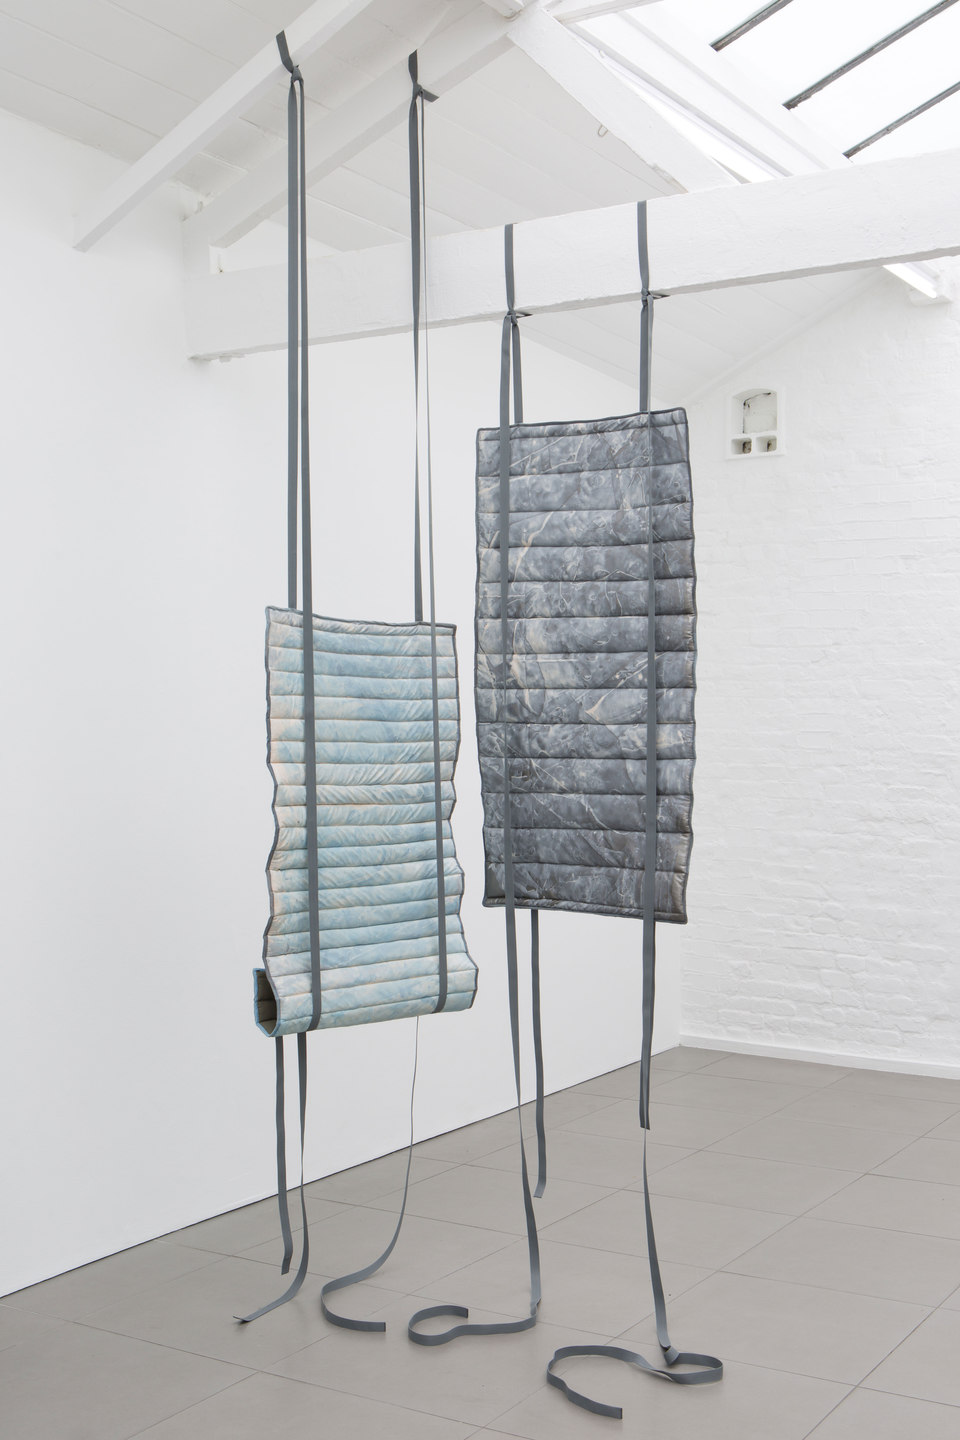 Kate Mackeson & Henrik Potter, ‘landlords are not currently collecting rent in self-love’, Kate Mackeson, Bullet proof (blue) & Bullet proof, 2016, Cell Project Space